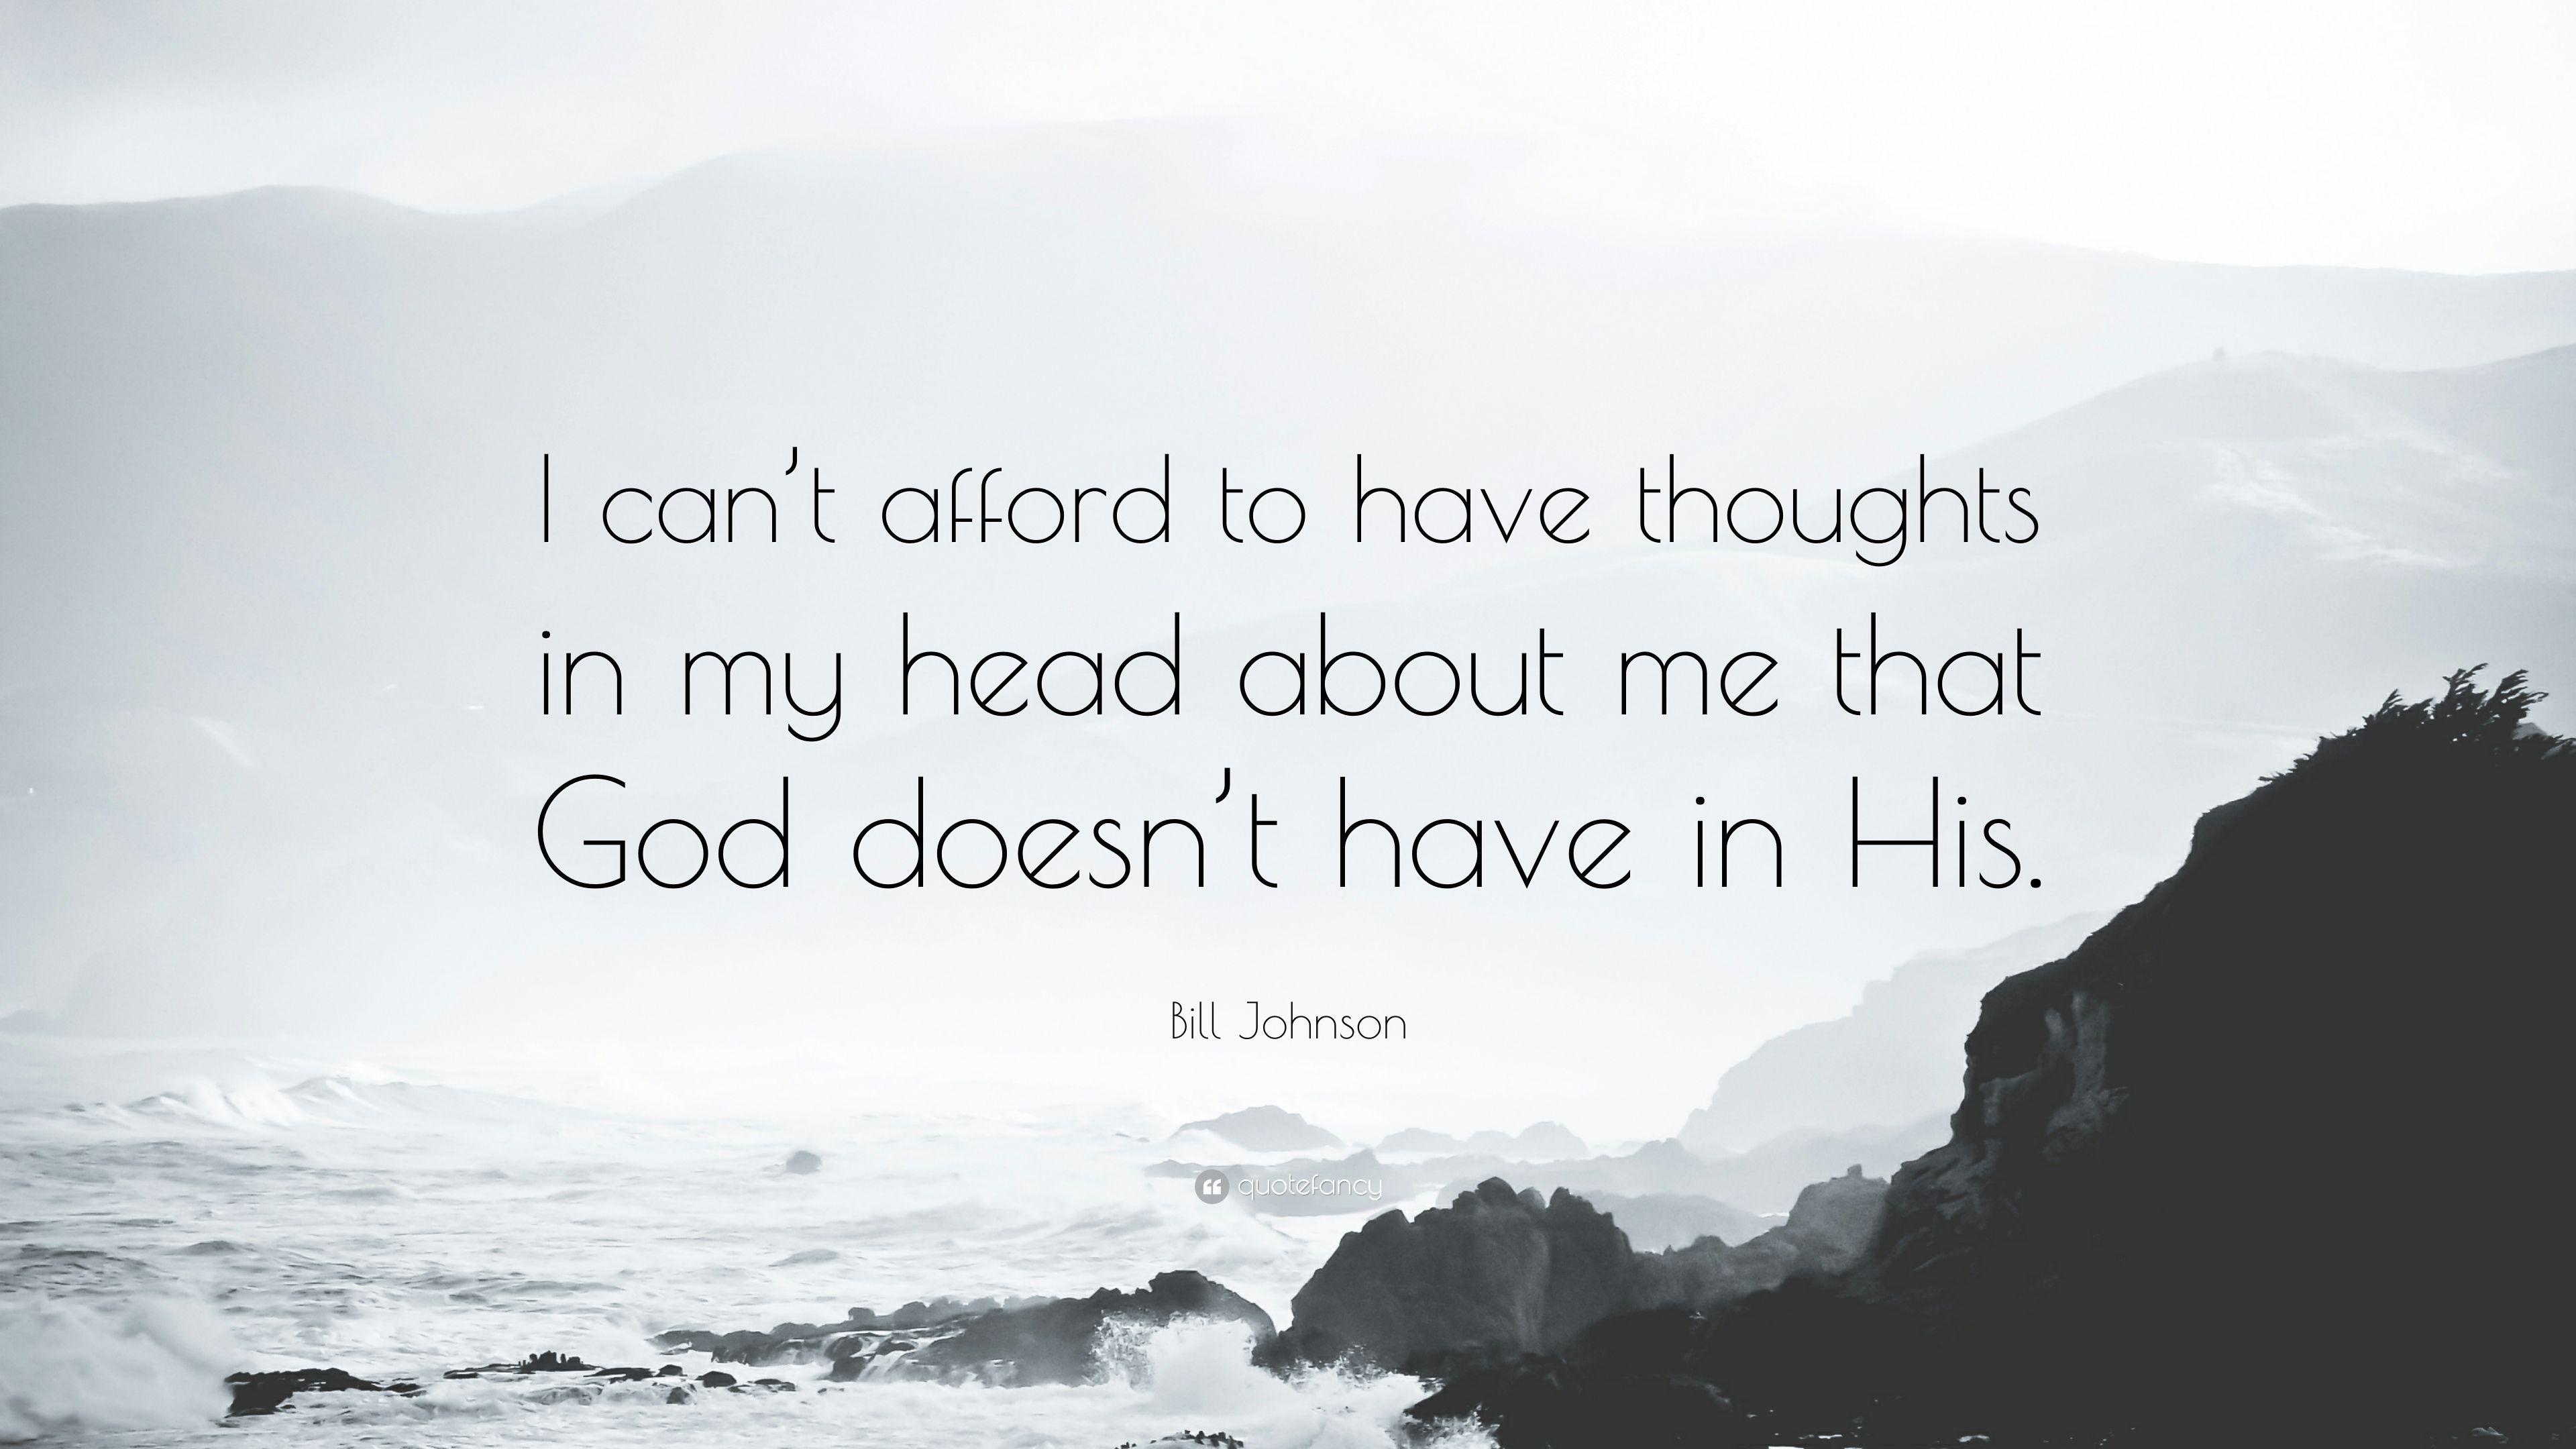 Bill Johnson Quote: “I can't afford to have thoughts in my head